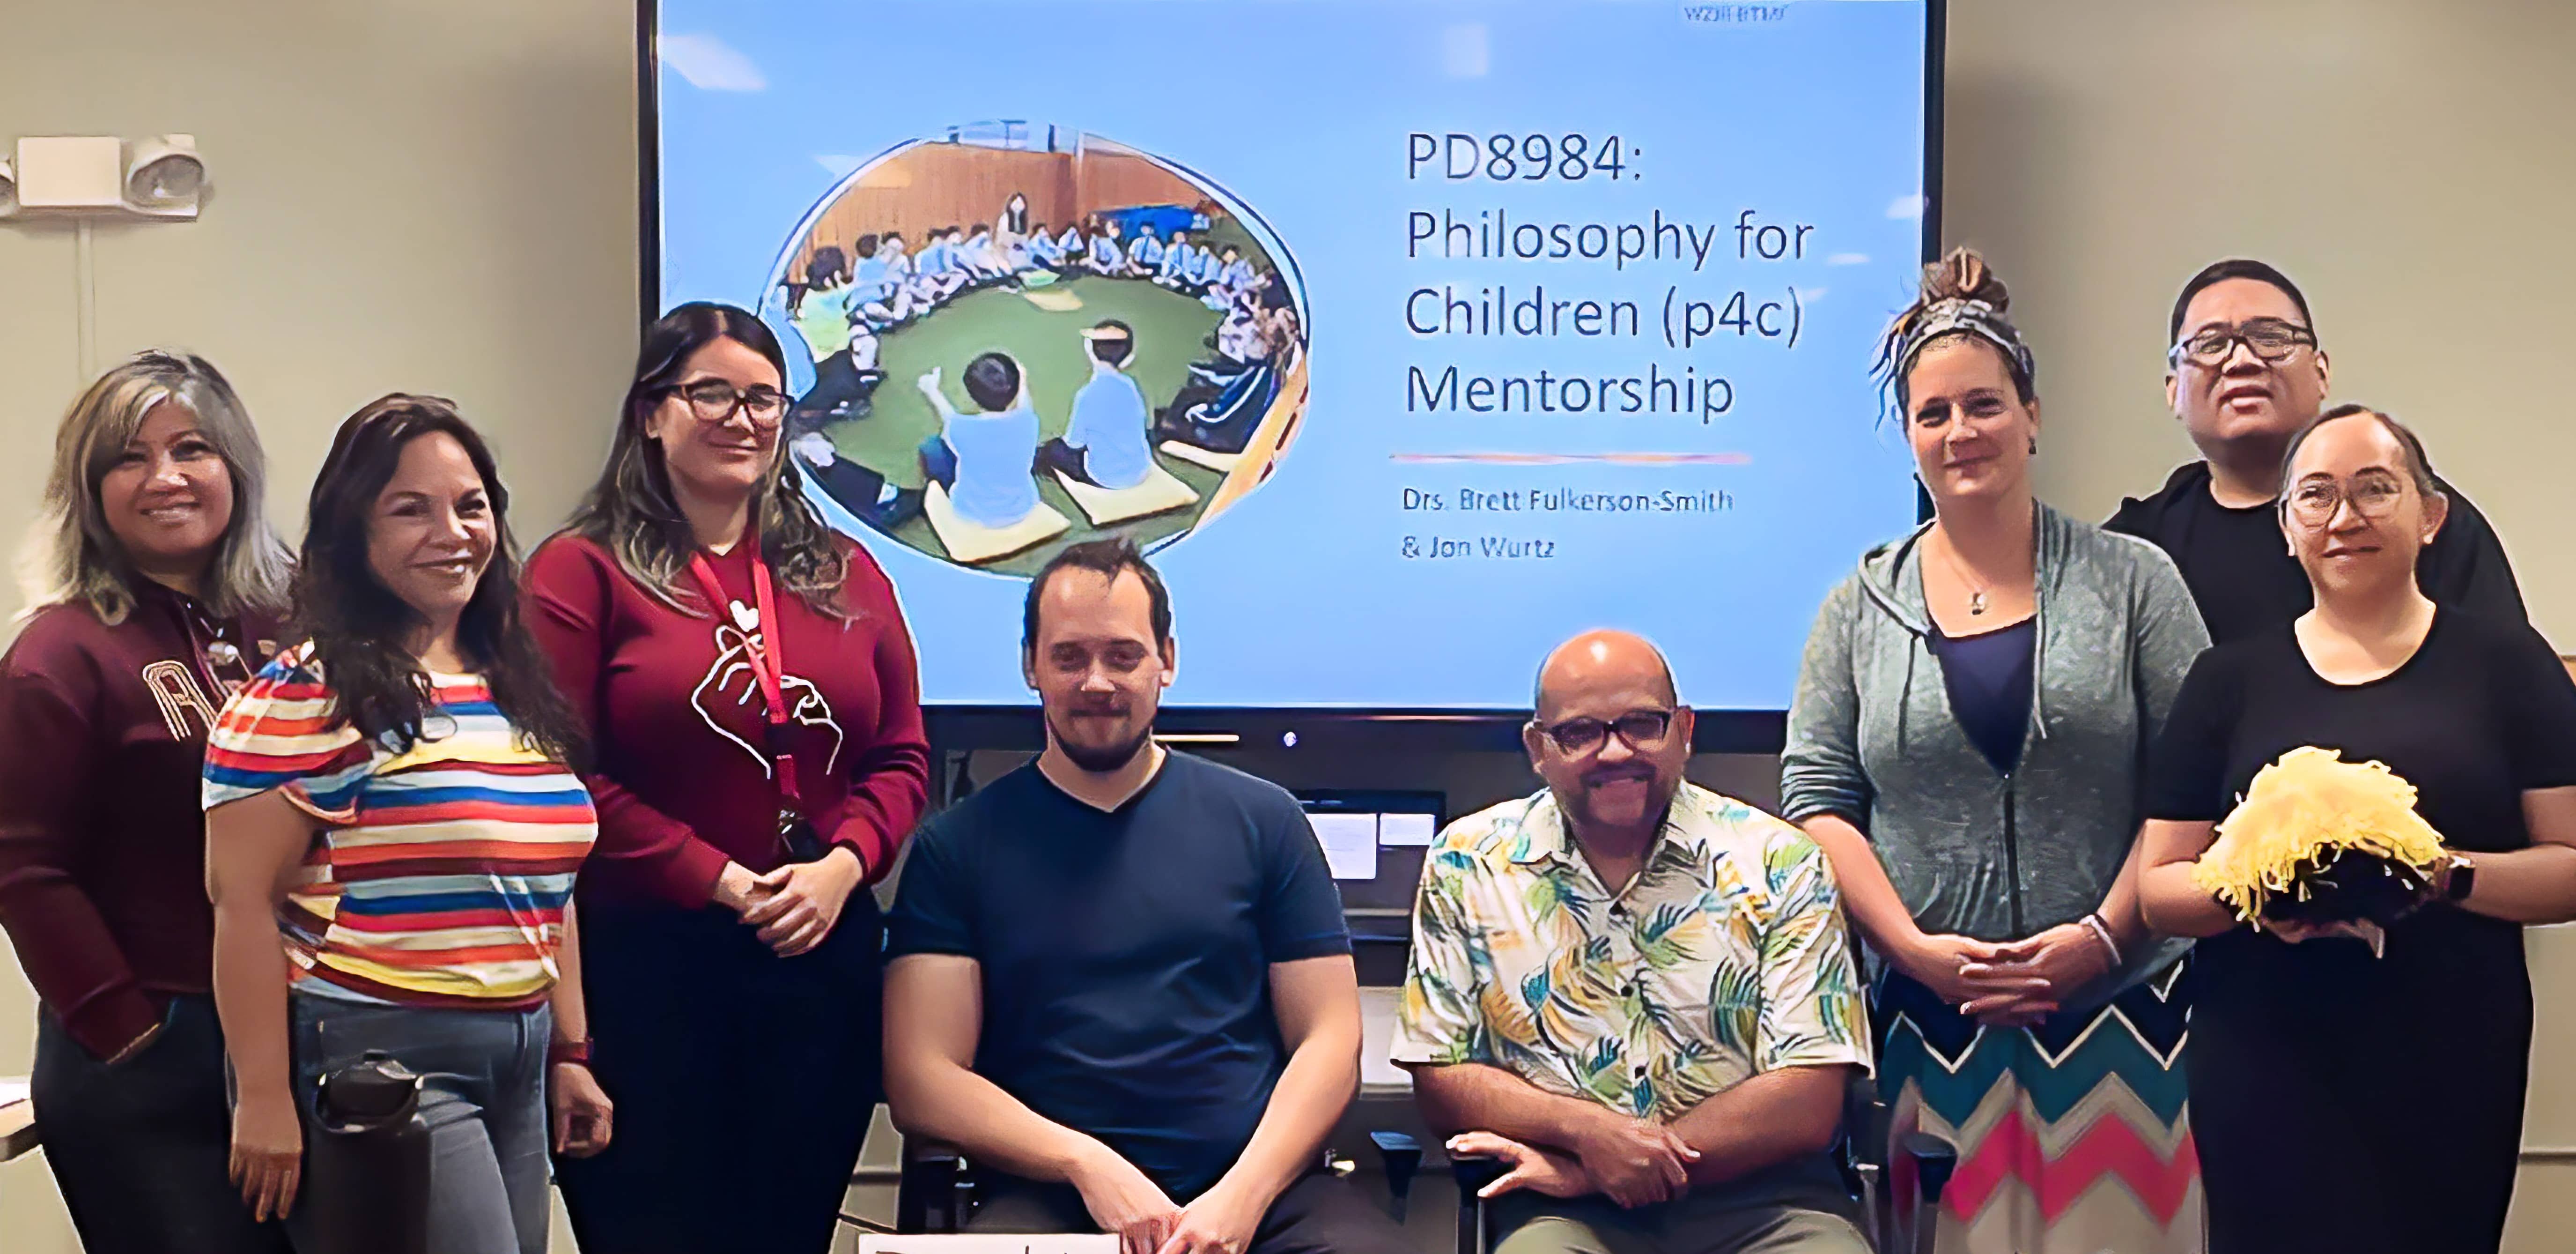 Philosophy professors and students posed for a photo